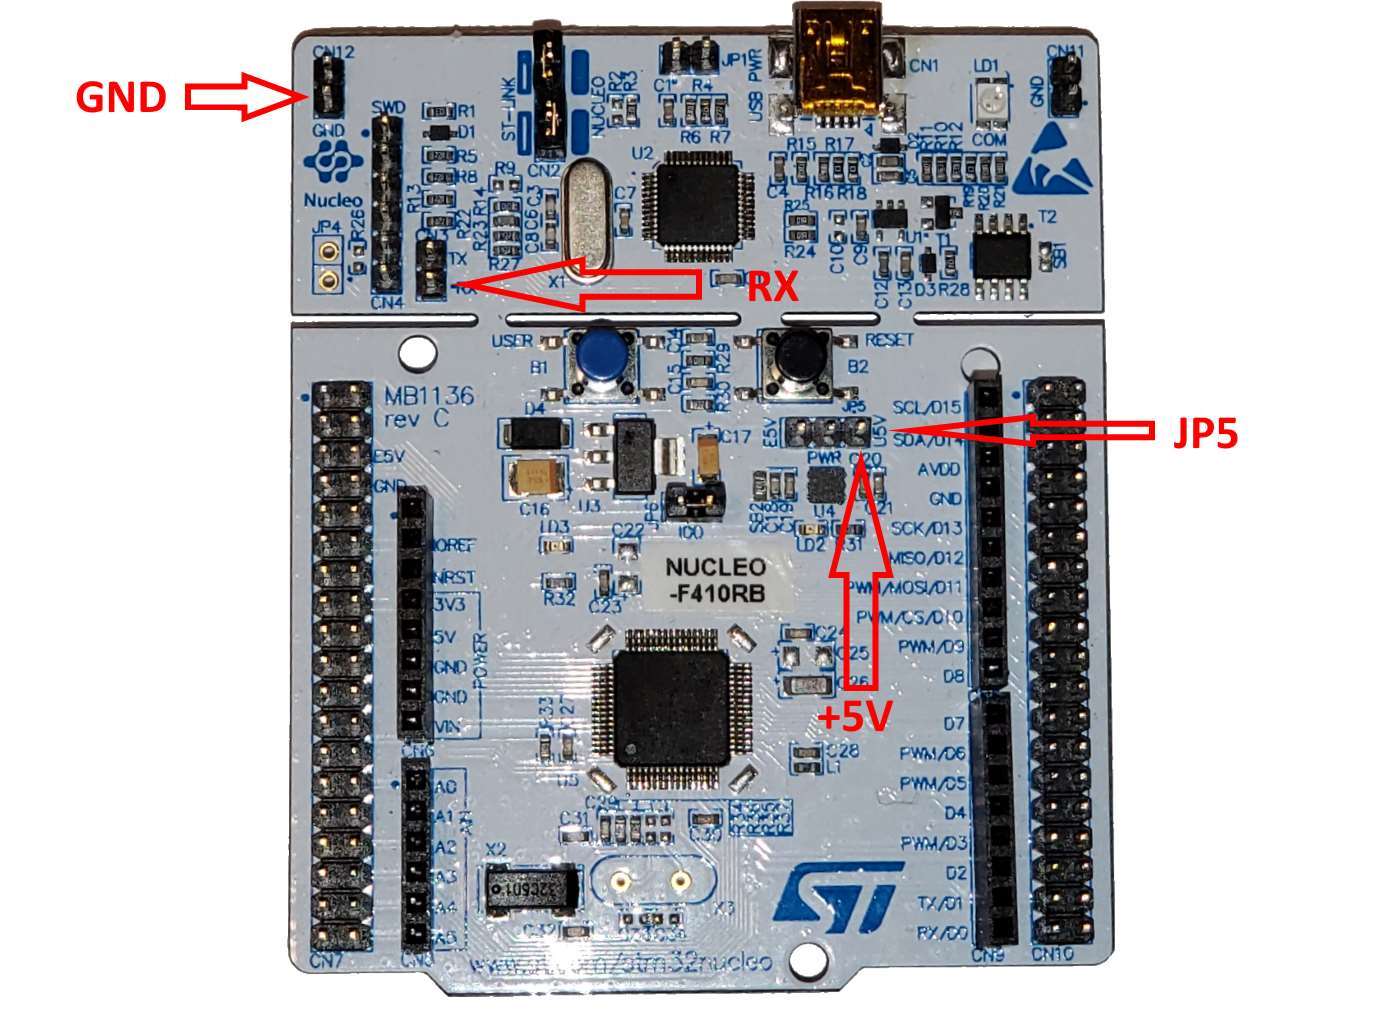 Guide by Tim; Use a ESP32-CAM Module to Stream HD Video Over Local Network  - Guides - Core Electronics Forum